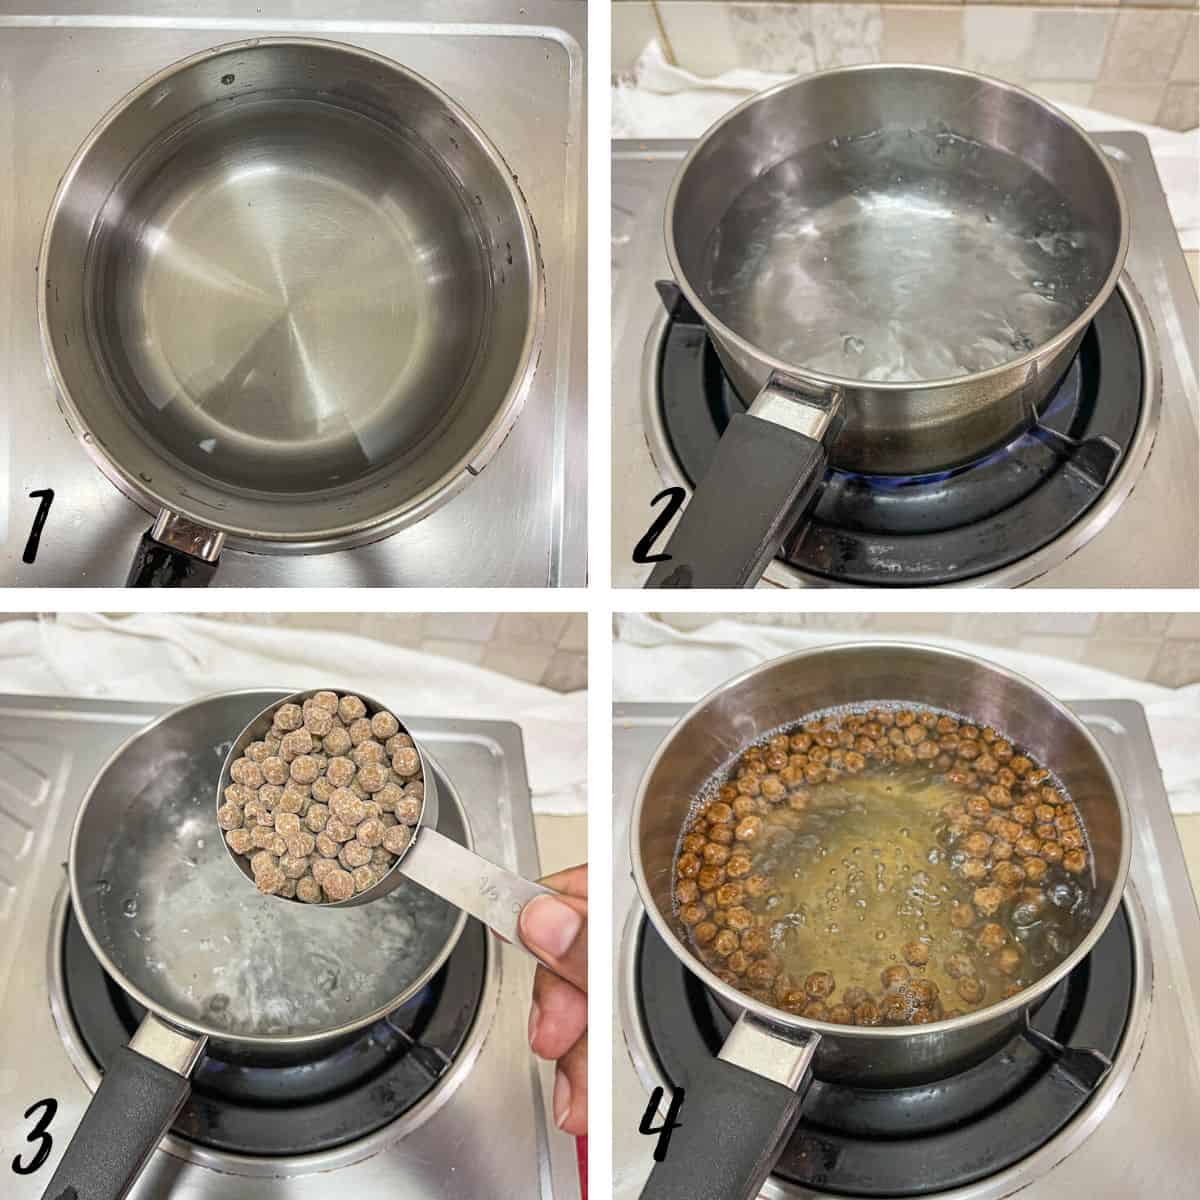 A poster of 4 images showing how to cook boba pearls.